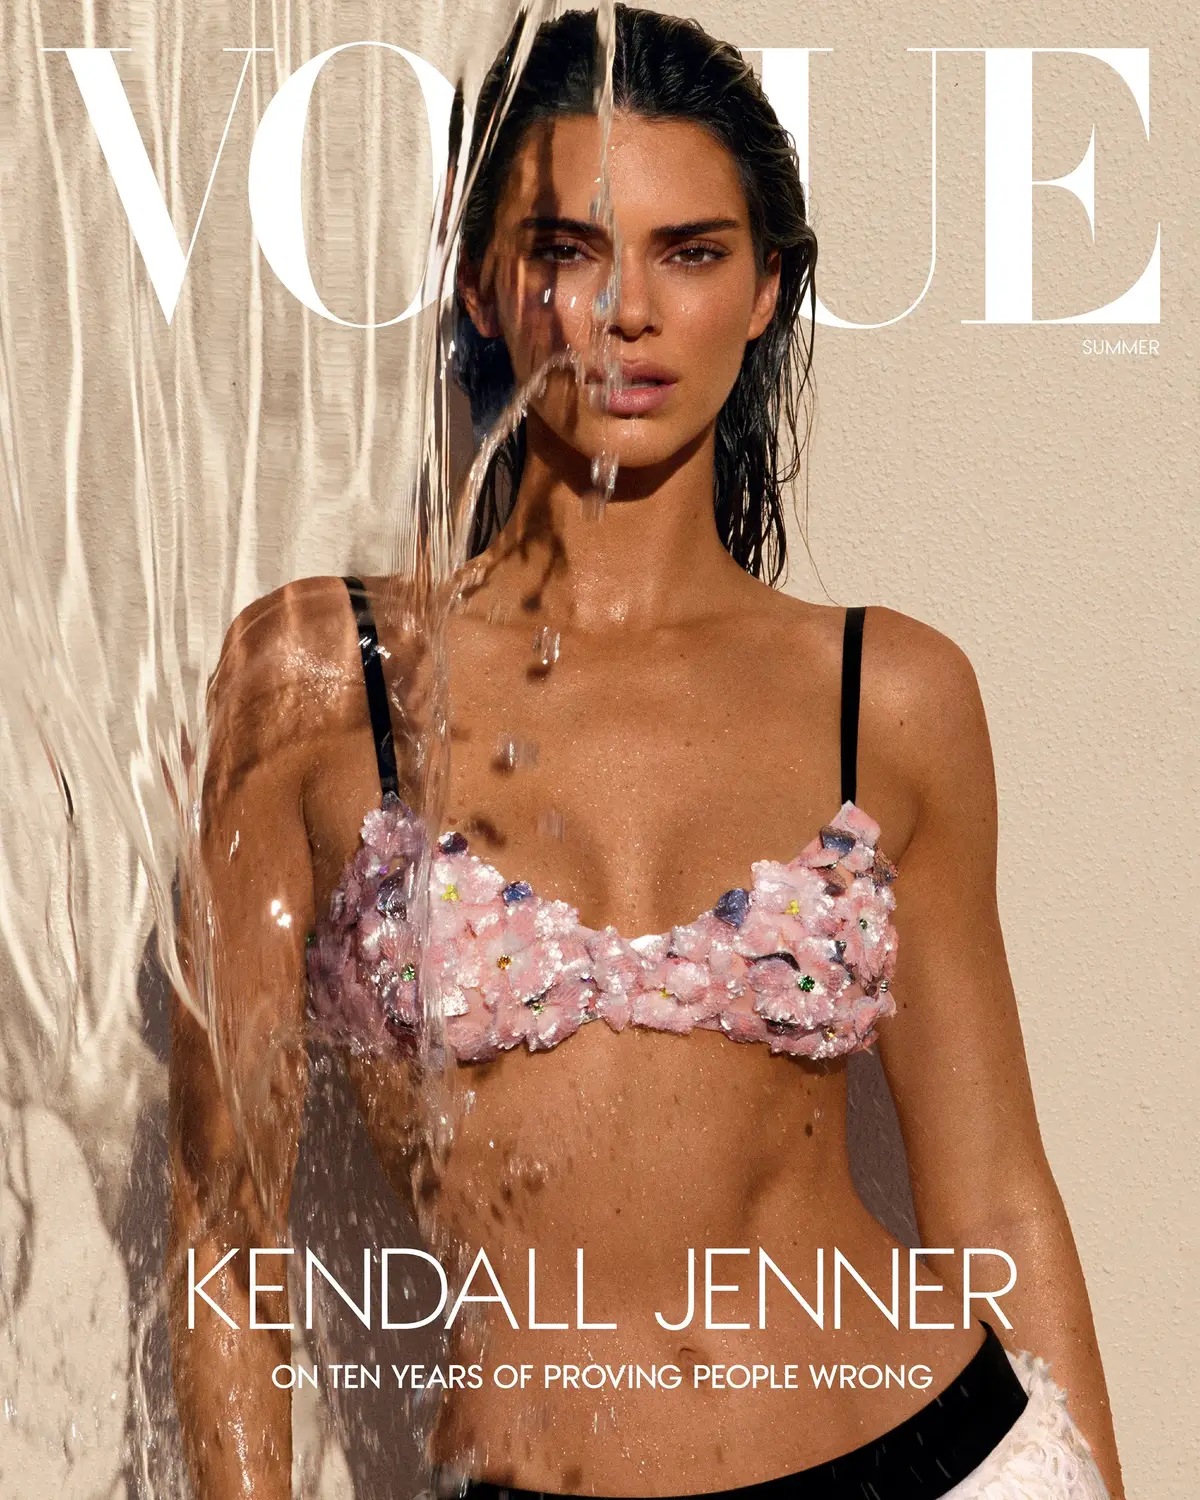 #KendallJenner is in her feelings—especially this year, which marks her 10th anniversary as a model. The milestone is cause for celebration, yes, but also a little self-reflection. For Vogue’s Summer Issue, Kendall talks about shifting her priorities, positive thinking, and 10 years of proving people wrong. Head to #vogue.com to read the full profile.